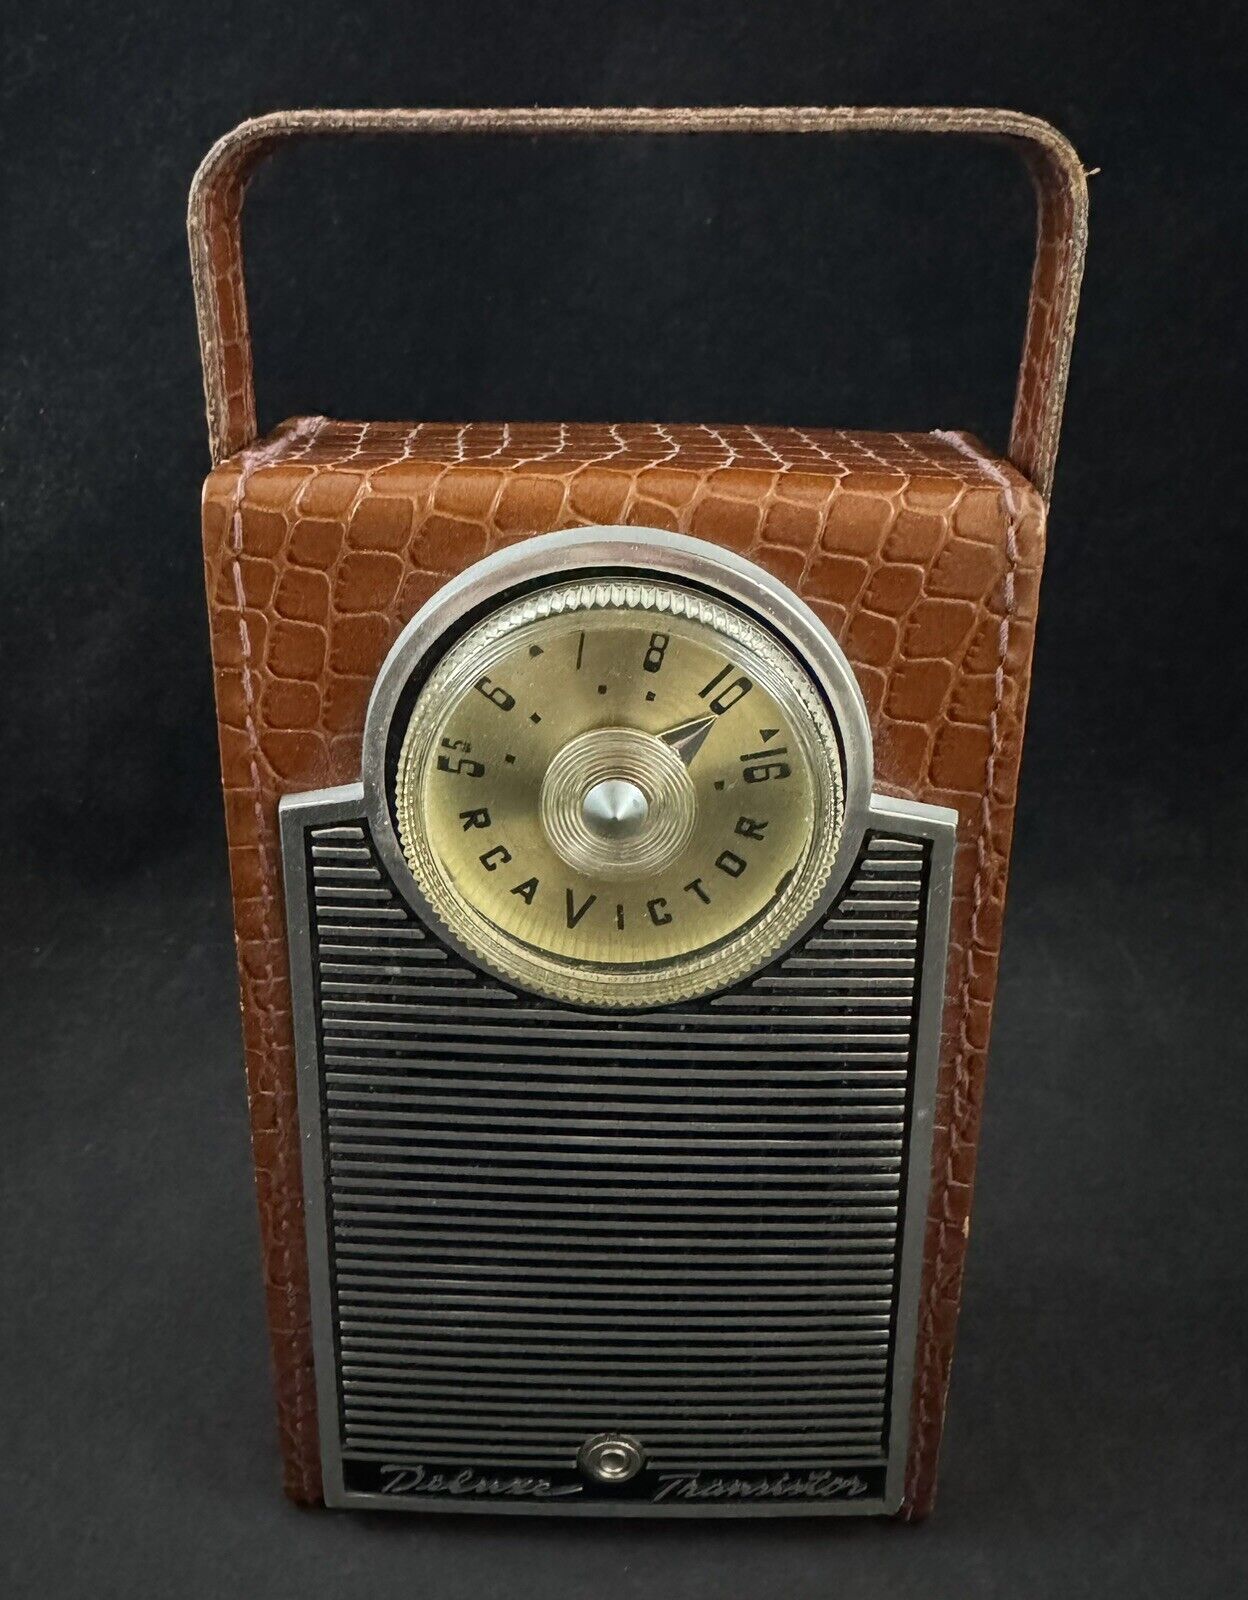 Vintage RCA Victor Deluxe Transistor Radio w/ Alligator Embossed Leather Cover